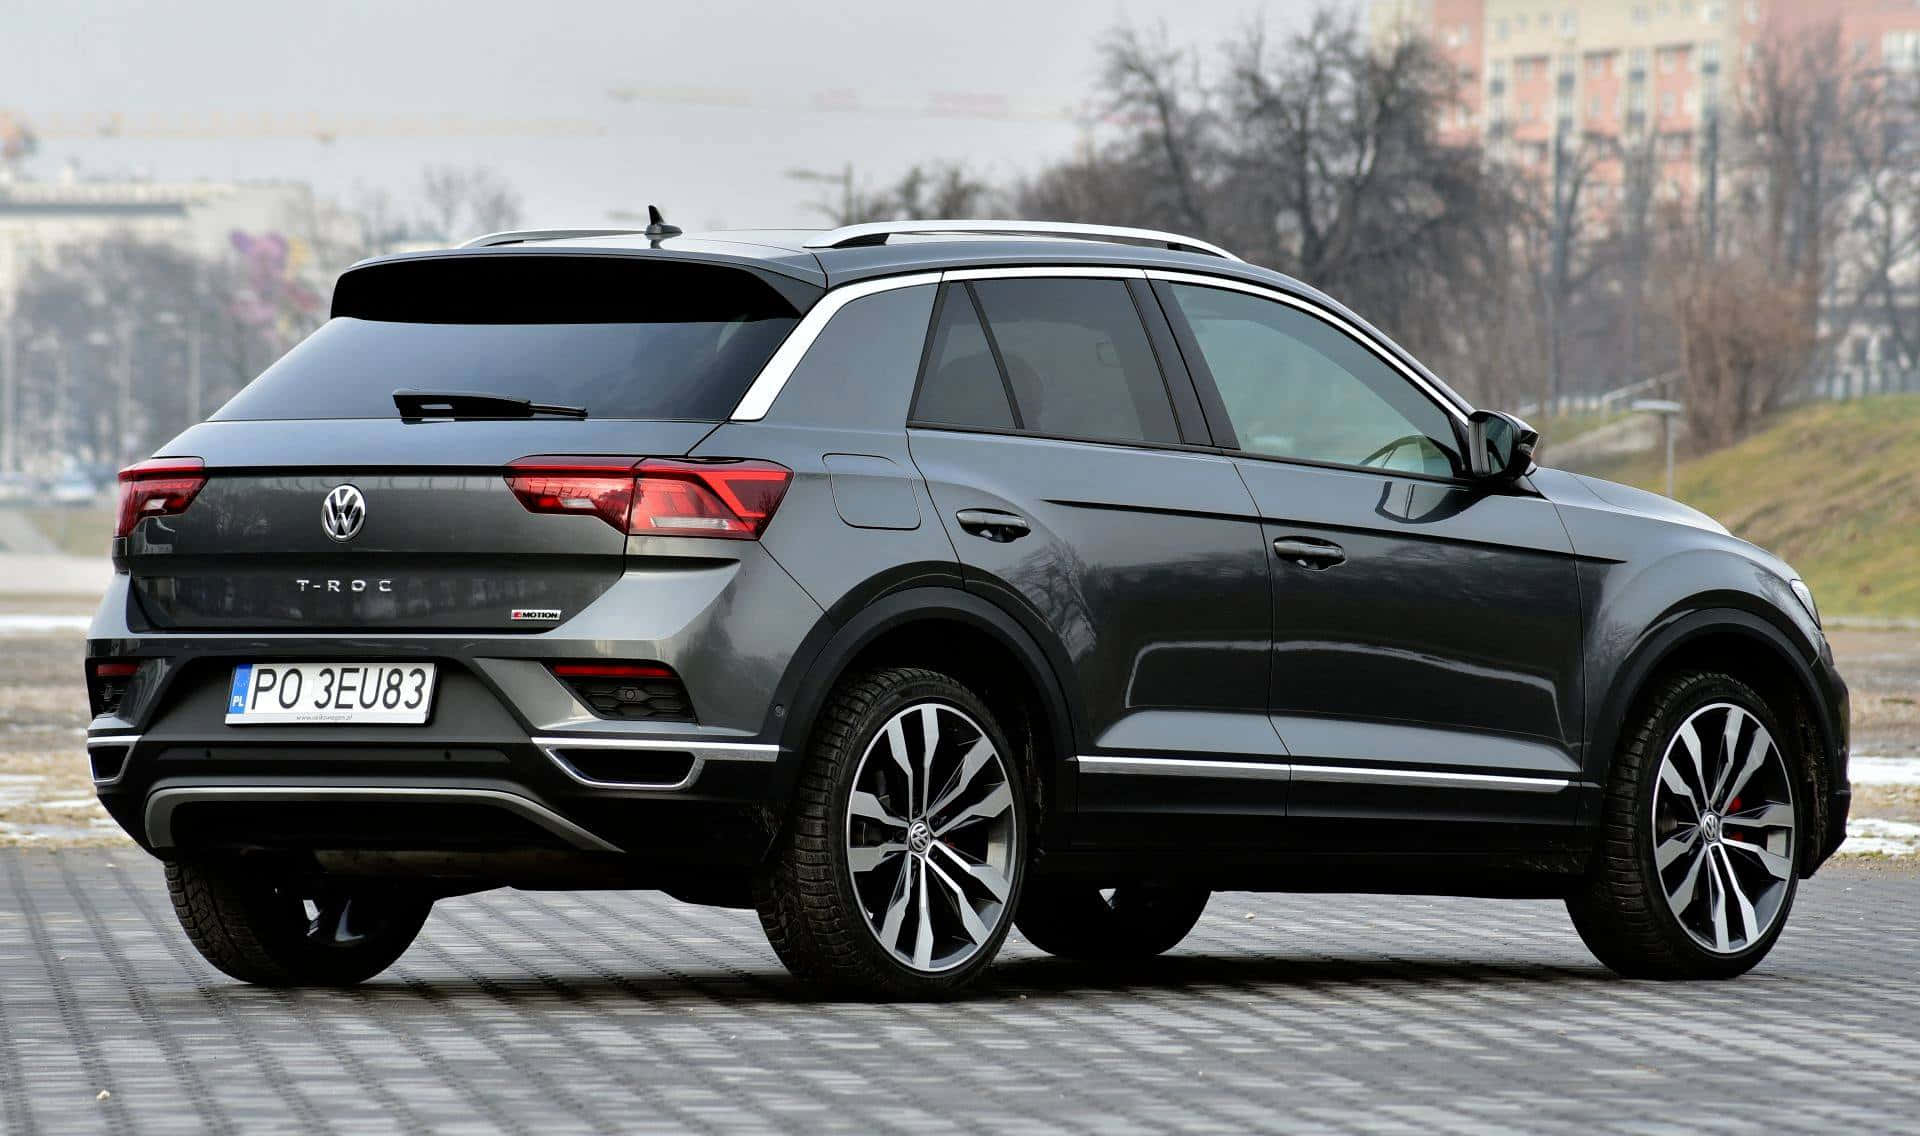 Sophisticated Style And Power - Volkswagen T-roc Wallpaper